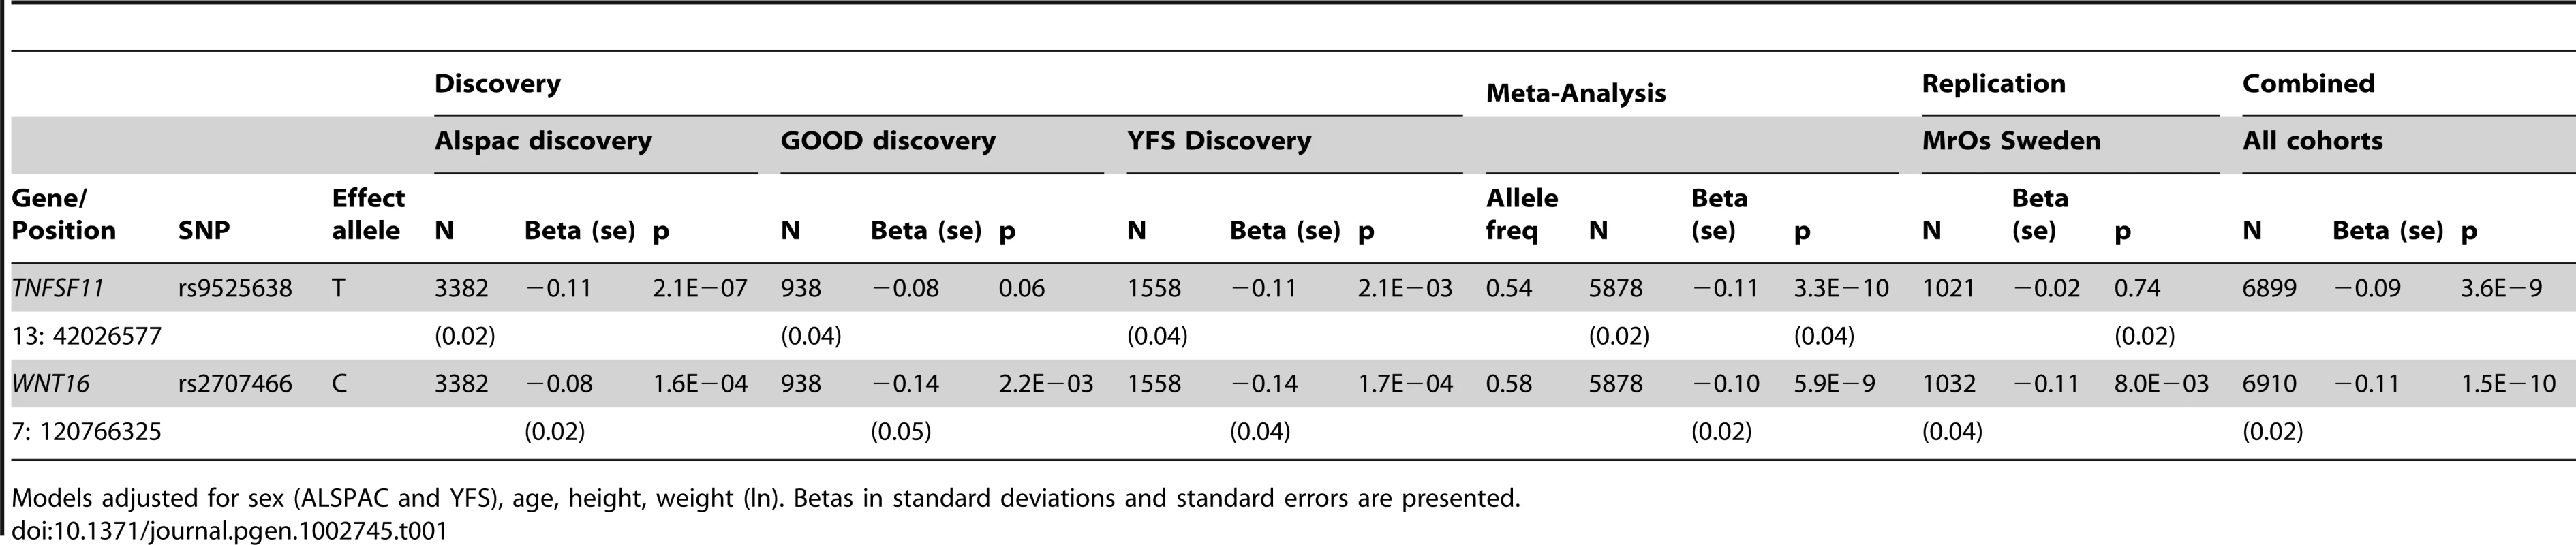 Top cortical thickness GWA meta-analysis hits, with replication and meta-analysis of all four cohorts.